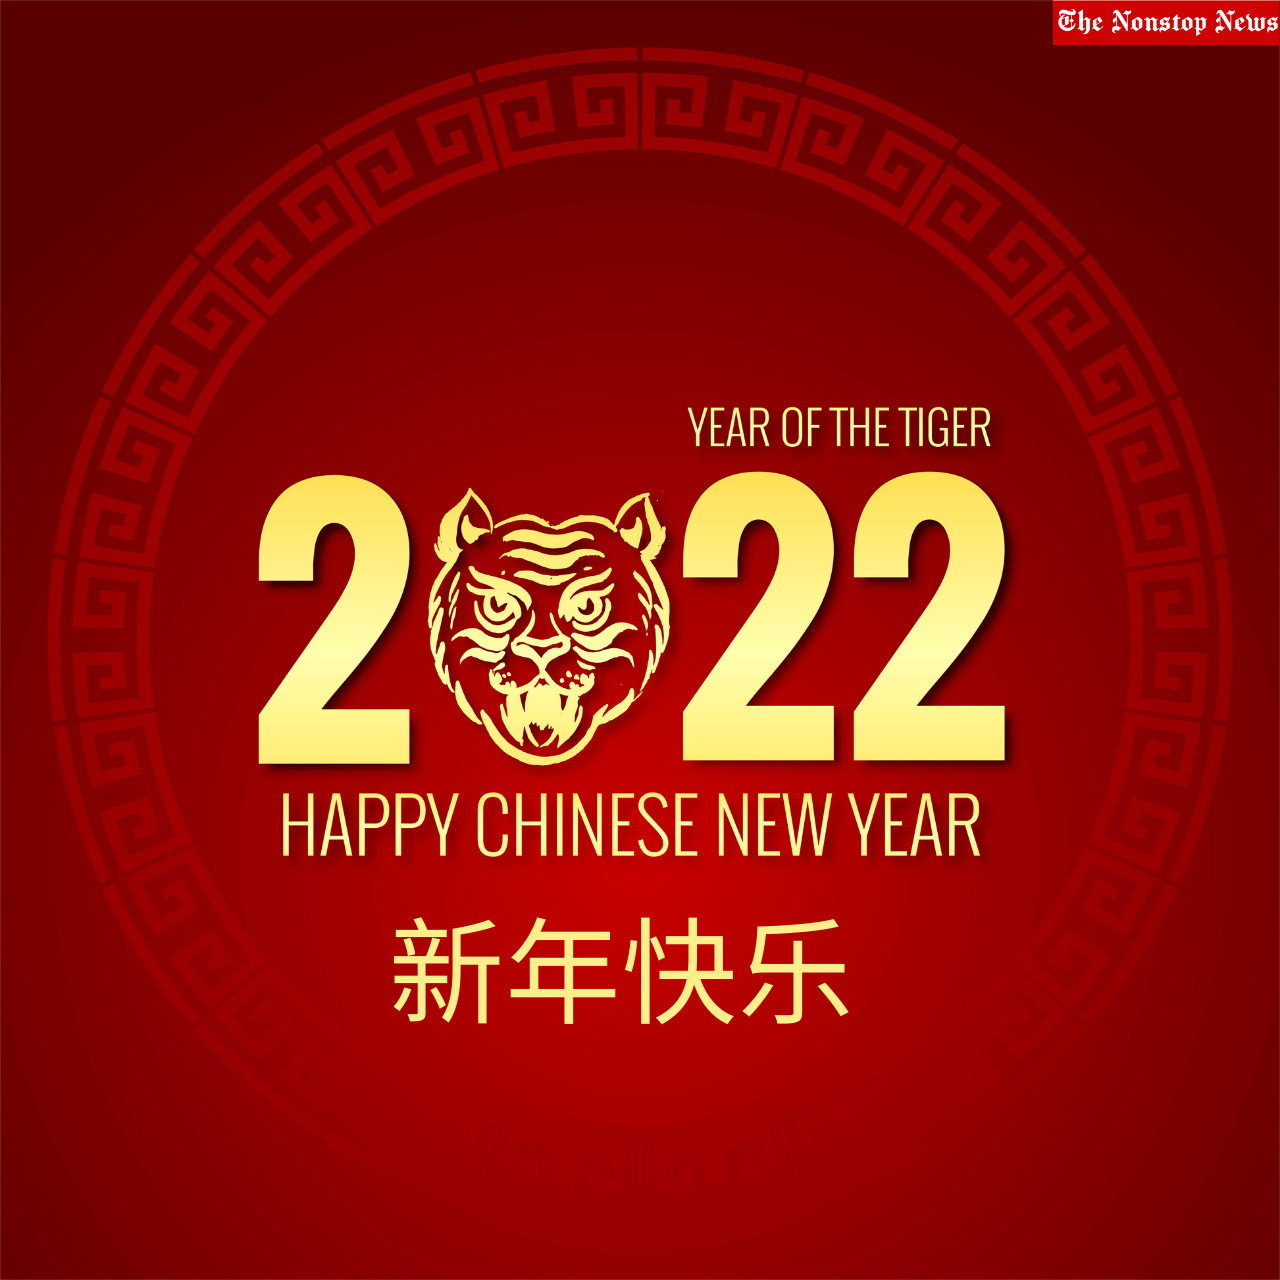 Chinese New Year 2022 Wishes, Quotes, HD Images, Greetings, Messages to greet your Business Clients